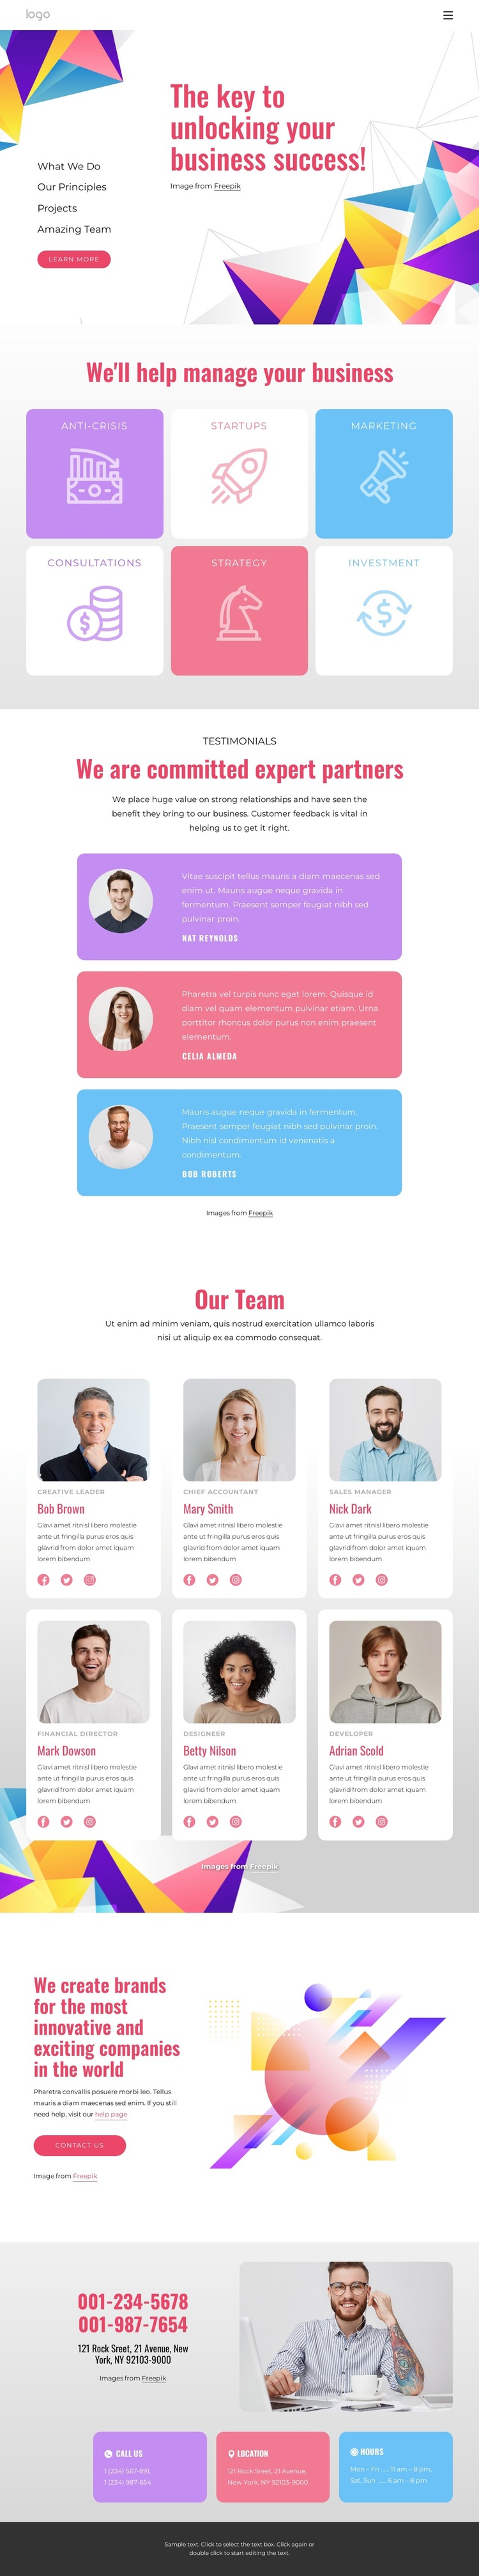 How to unlock brand success HTML5 Template